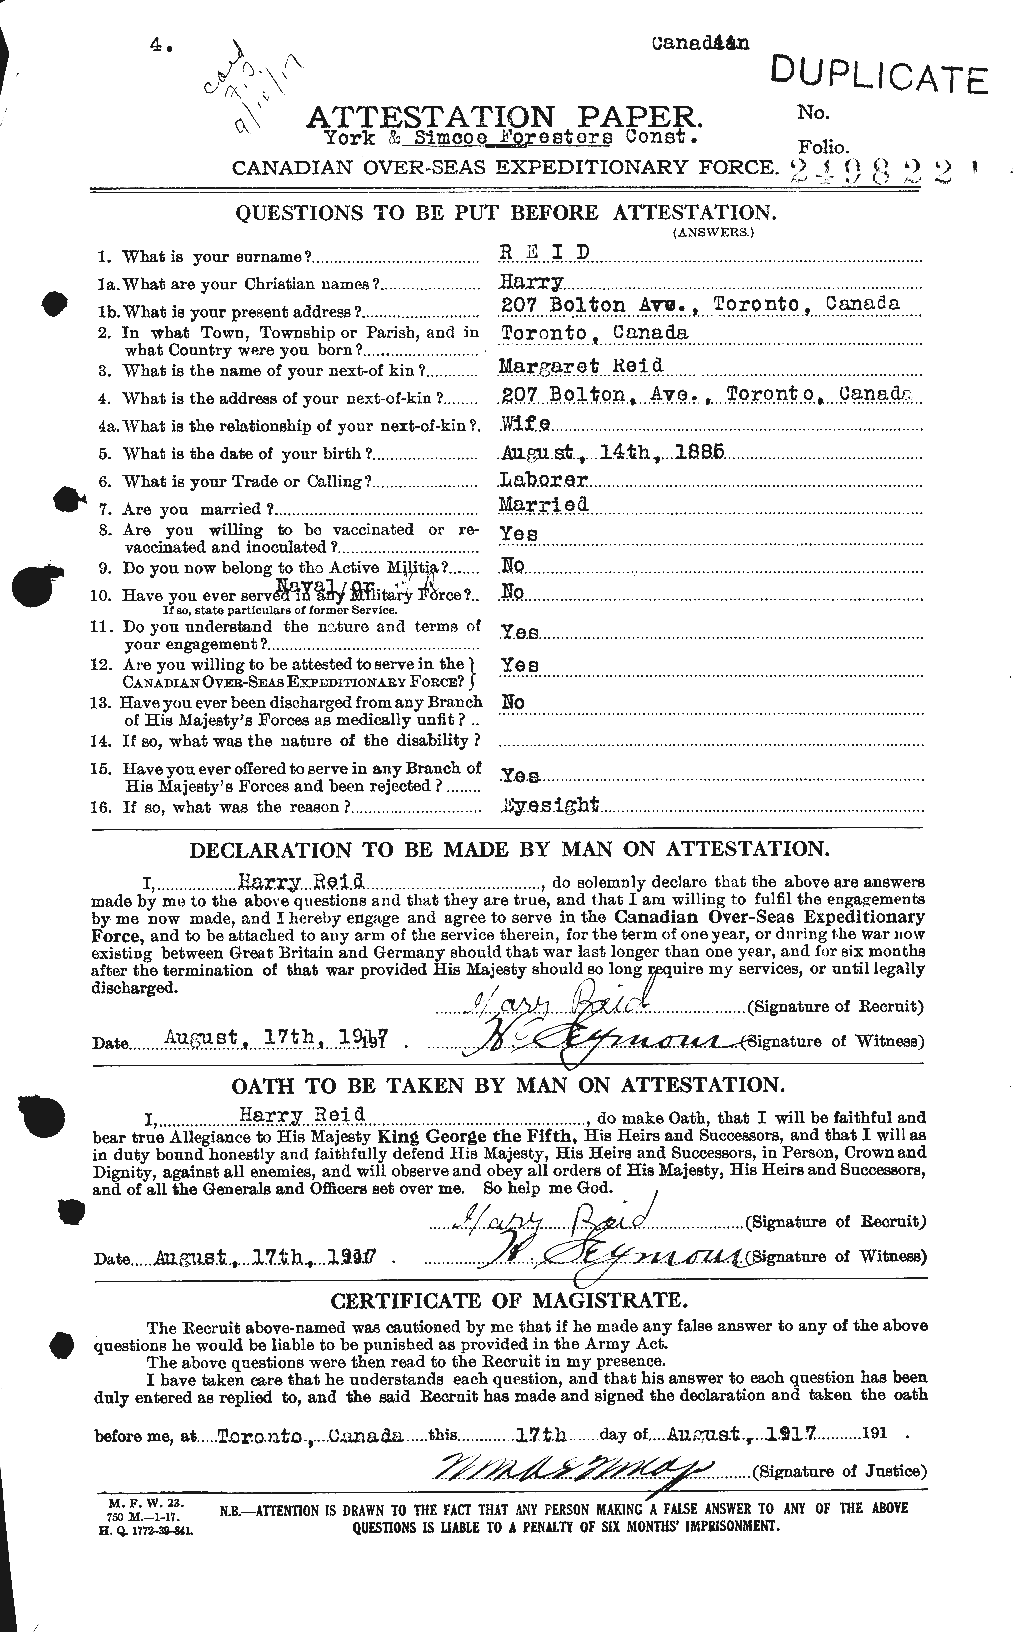 Personnel Records of the First World War - CEF 598571a